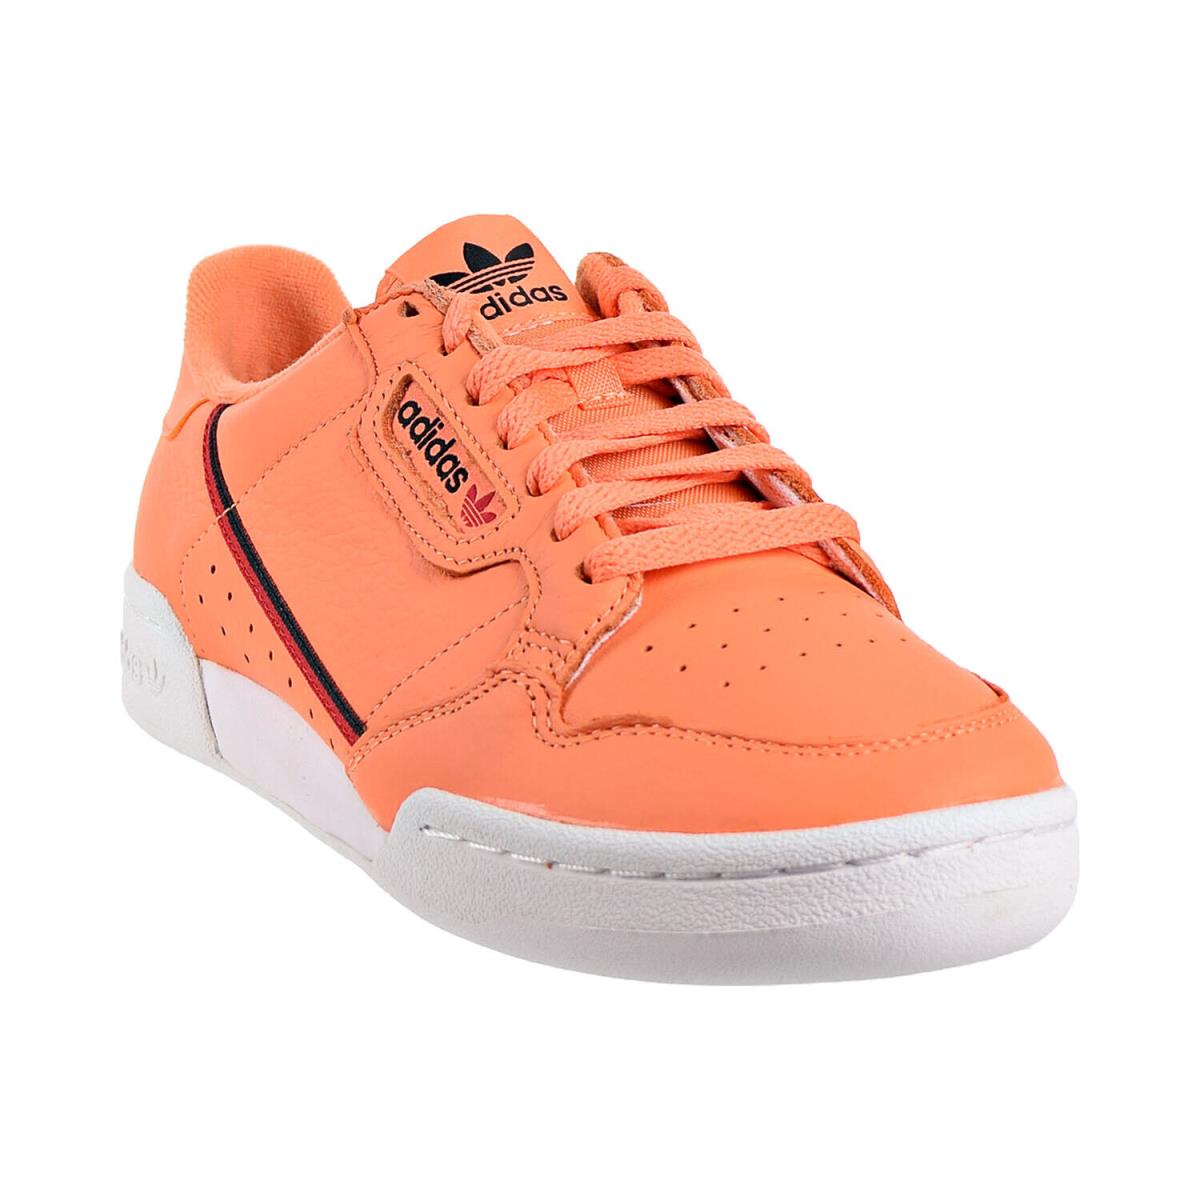 Adidas Continental 80 Mens Shoes Easy Orange-core Black-scarlet CG7124 - Easy Orange/Core Black/Scarlet